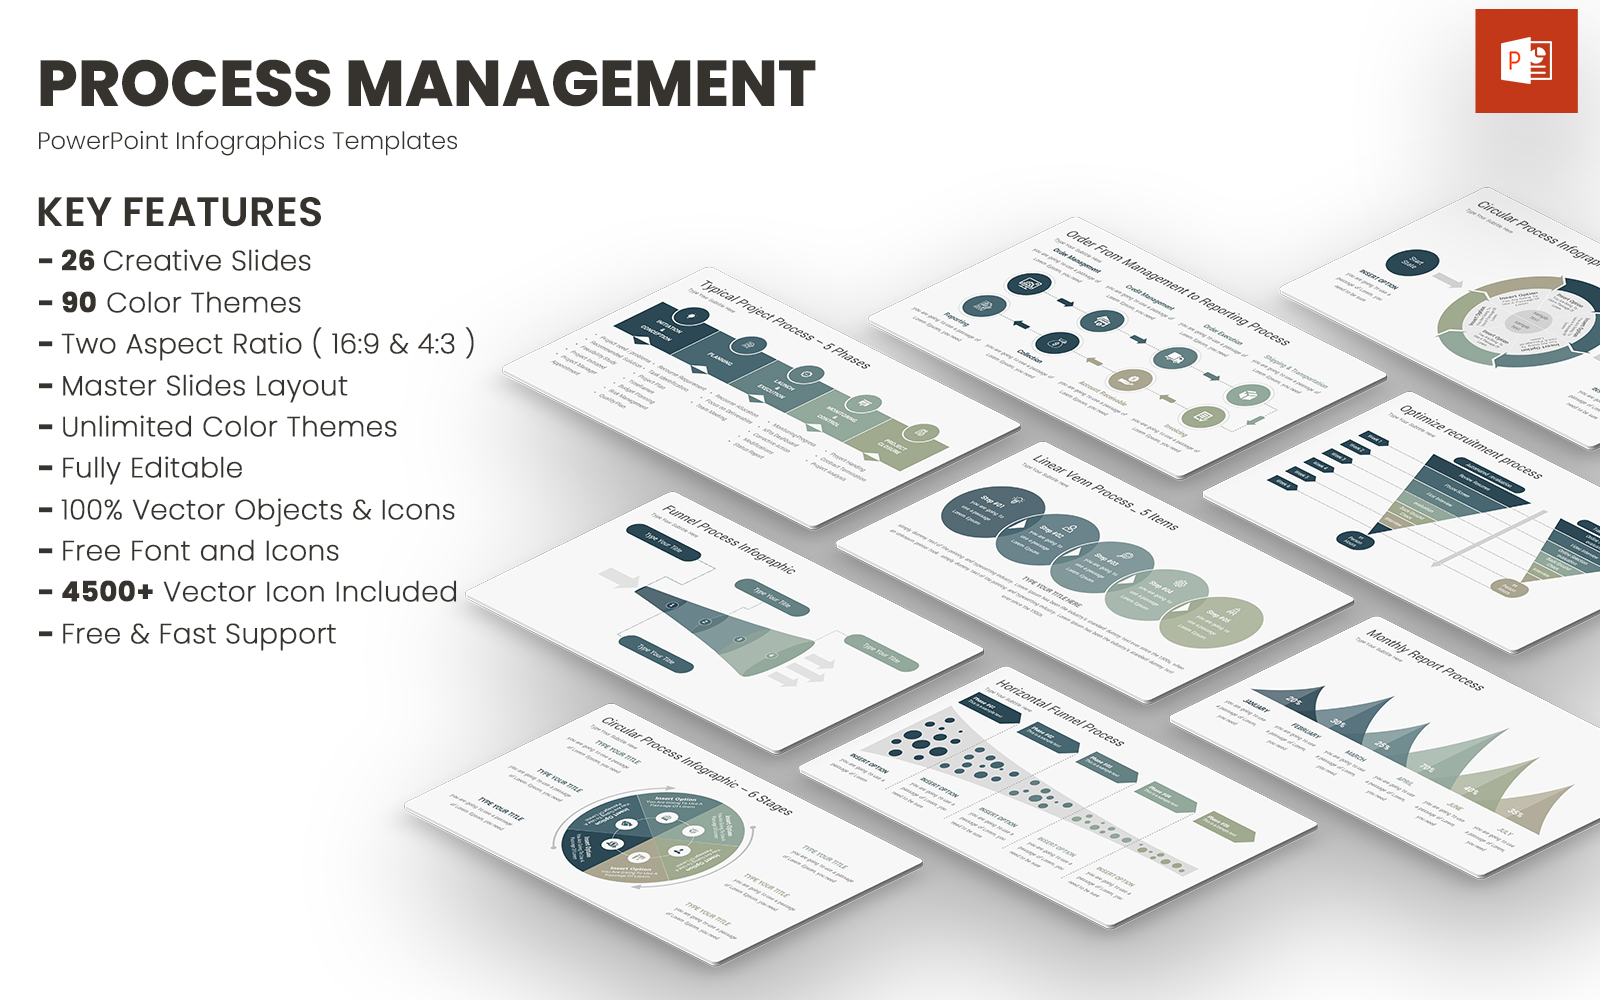 Process Management Infographic PowerPoint Template